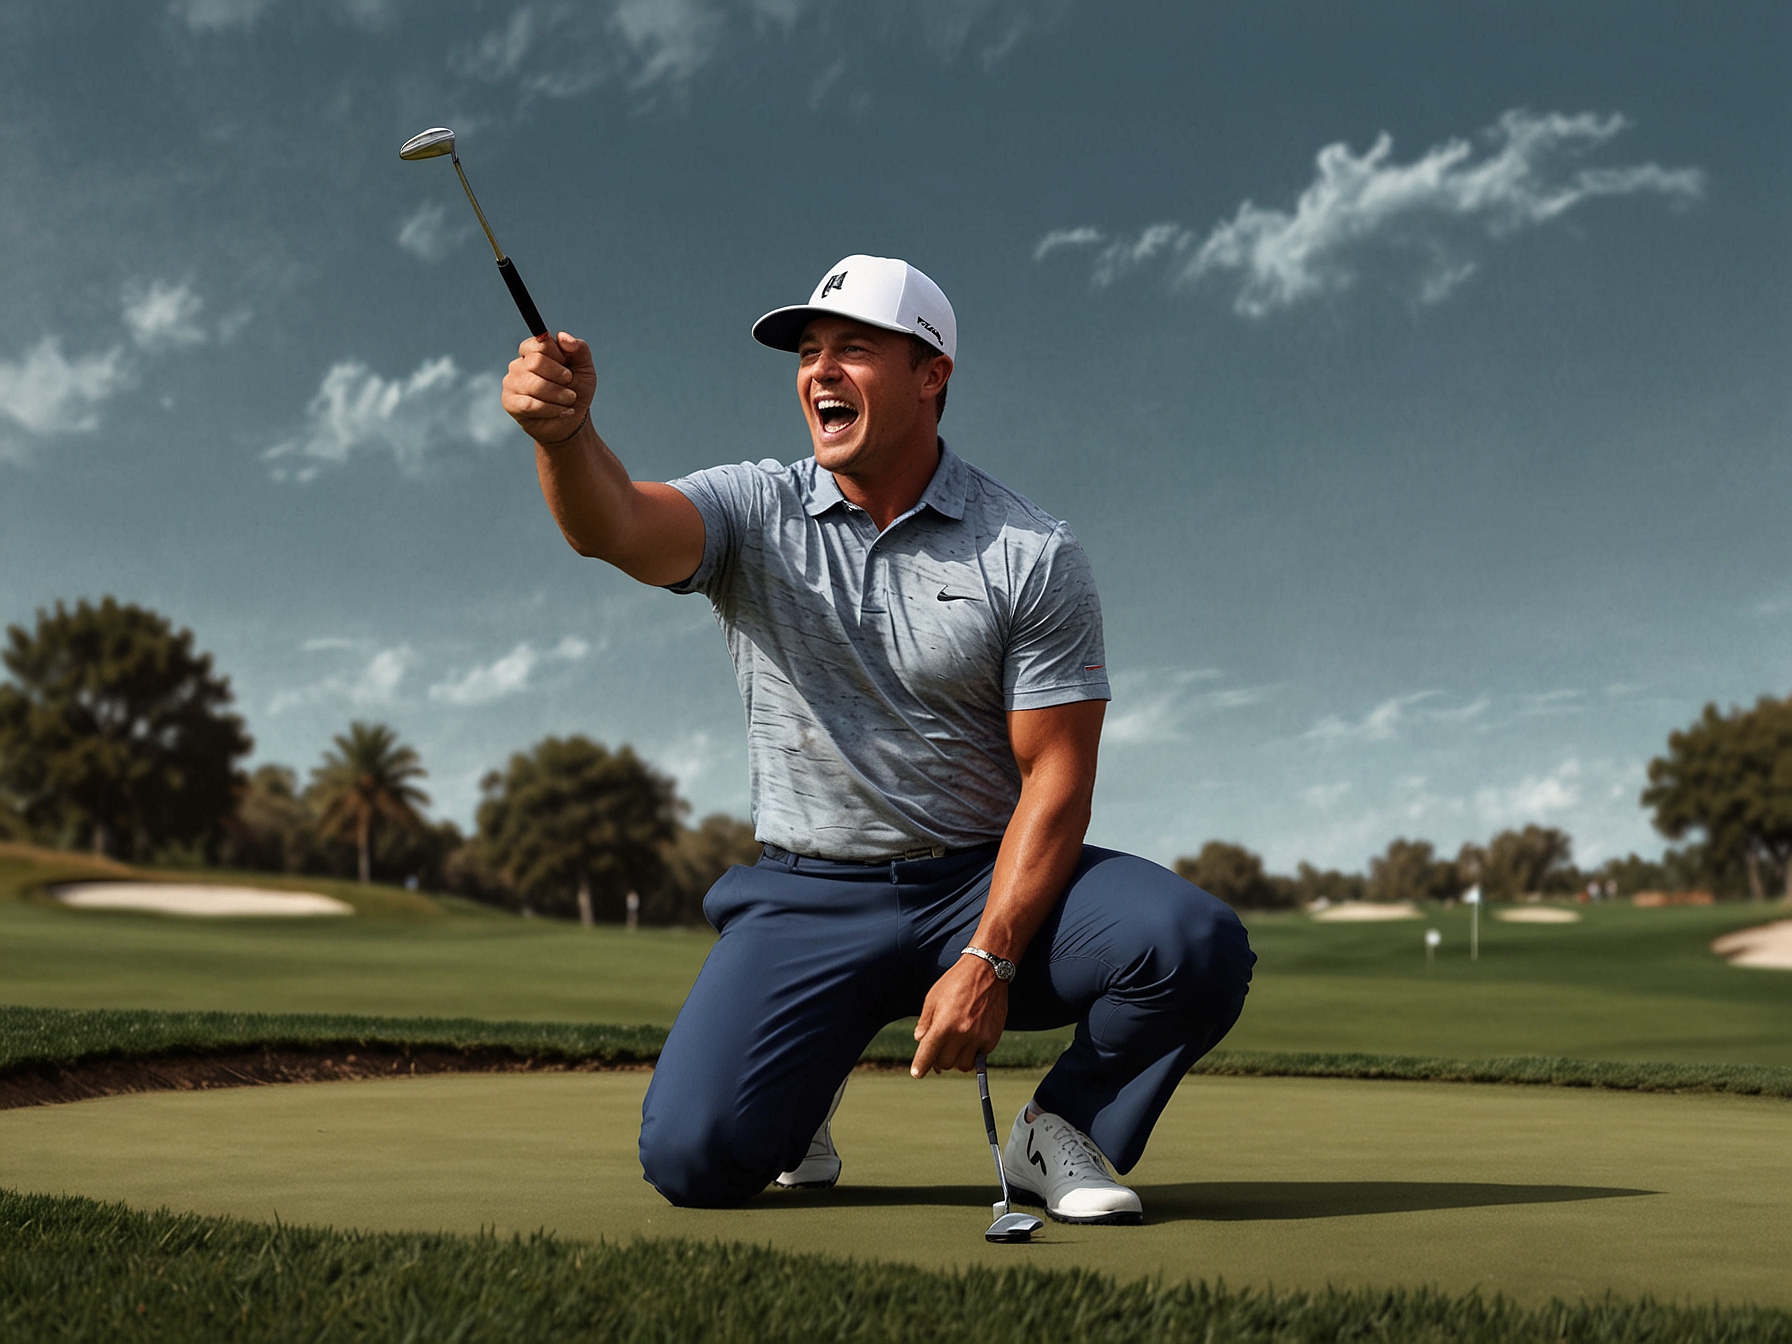 A memorable moment of Bryson DeChambeau celebrating after sinking a crucial birdie putt on the 14th hole, emphasizing his exceptional putting skills and strategic game management.